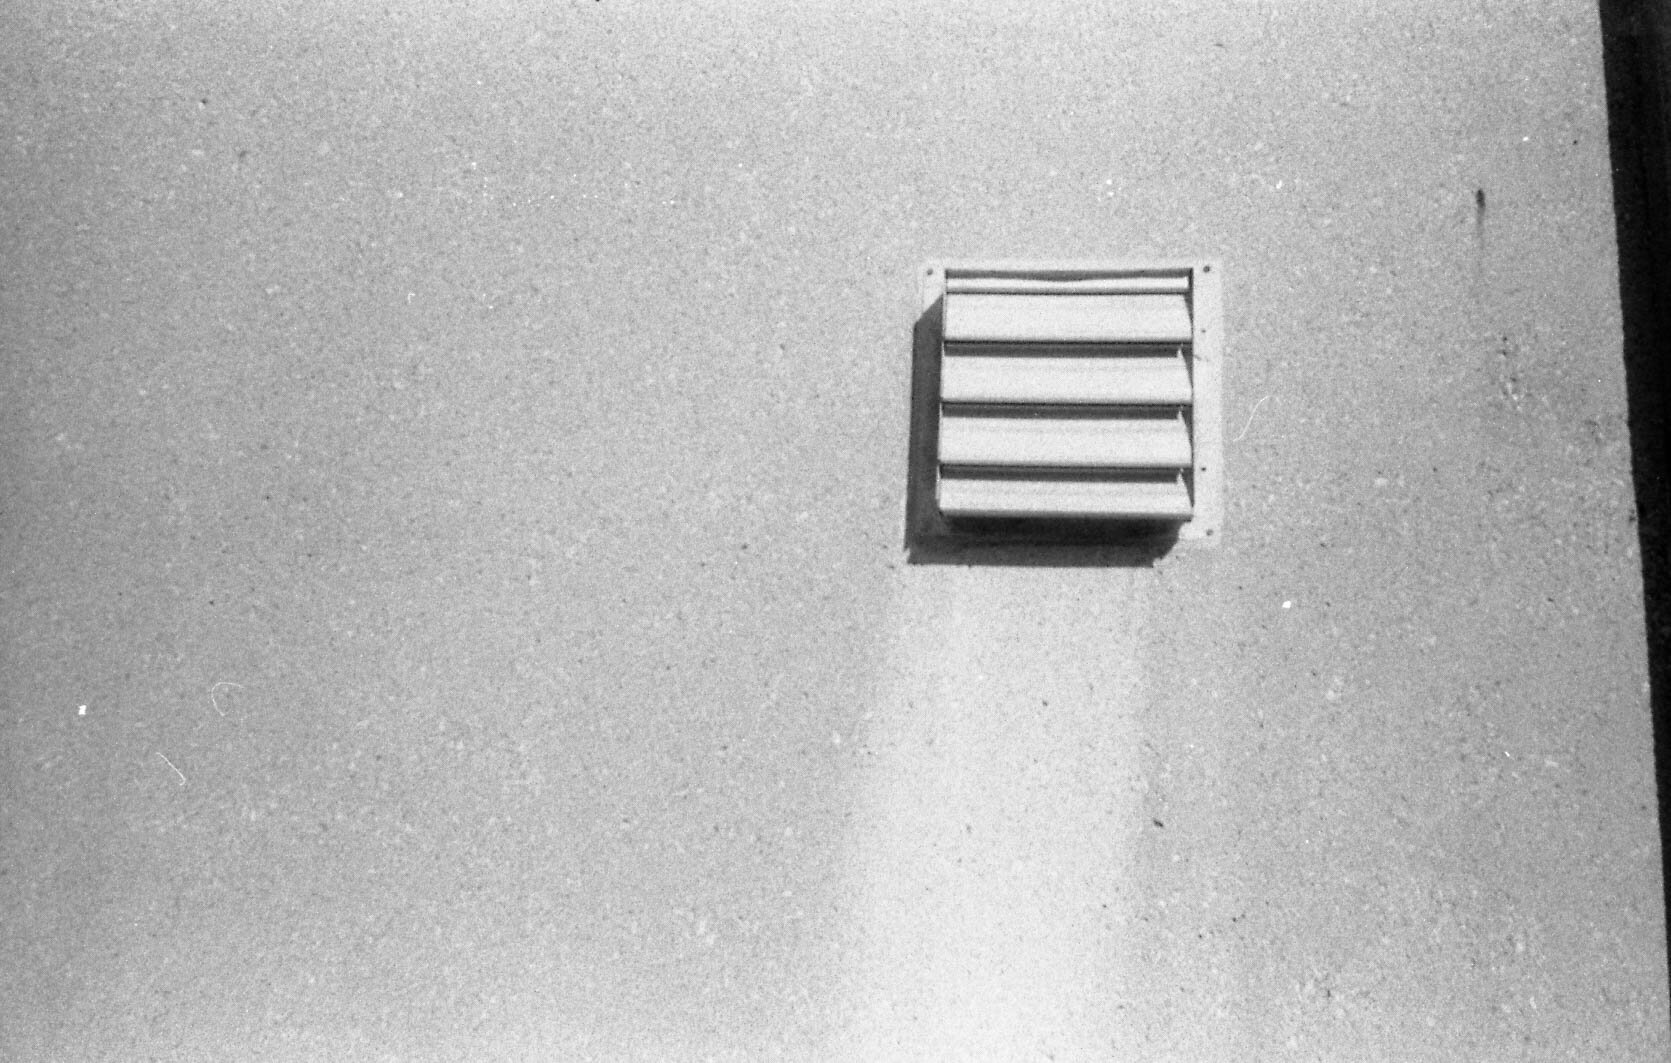 Tri-X 400 pulled to 200 